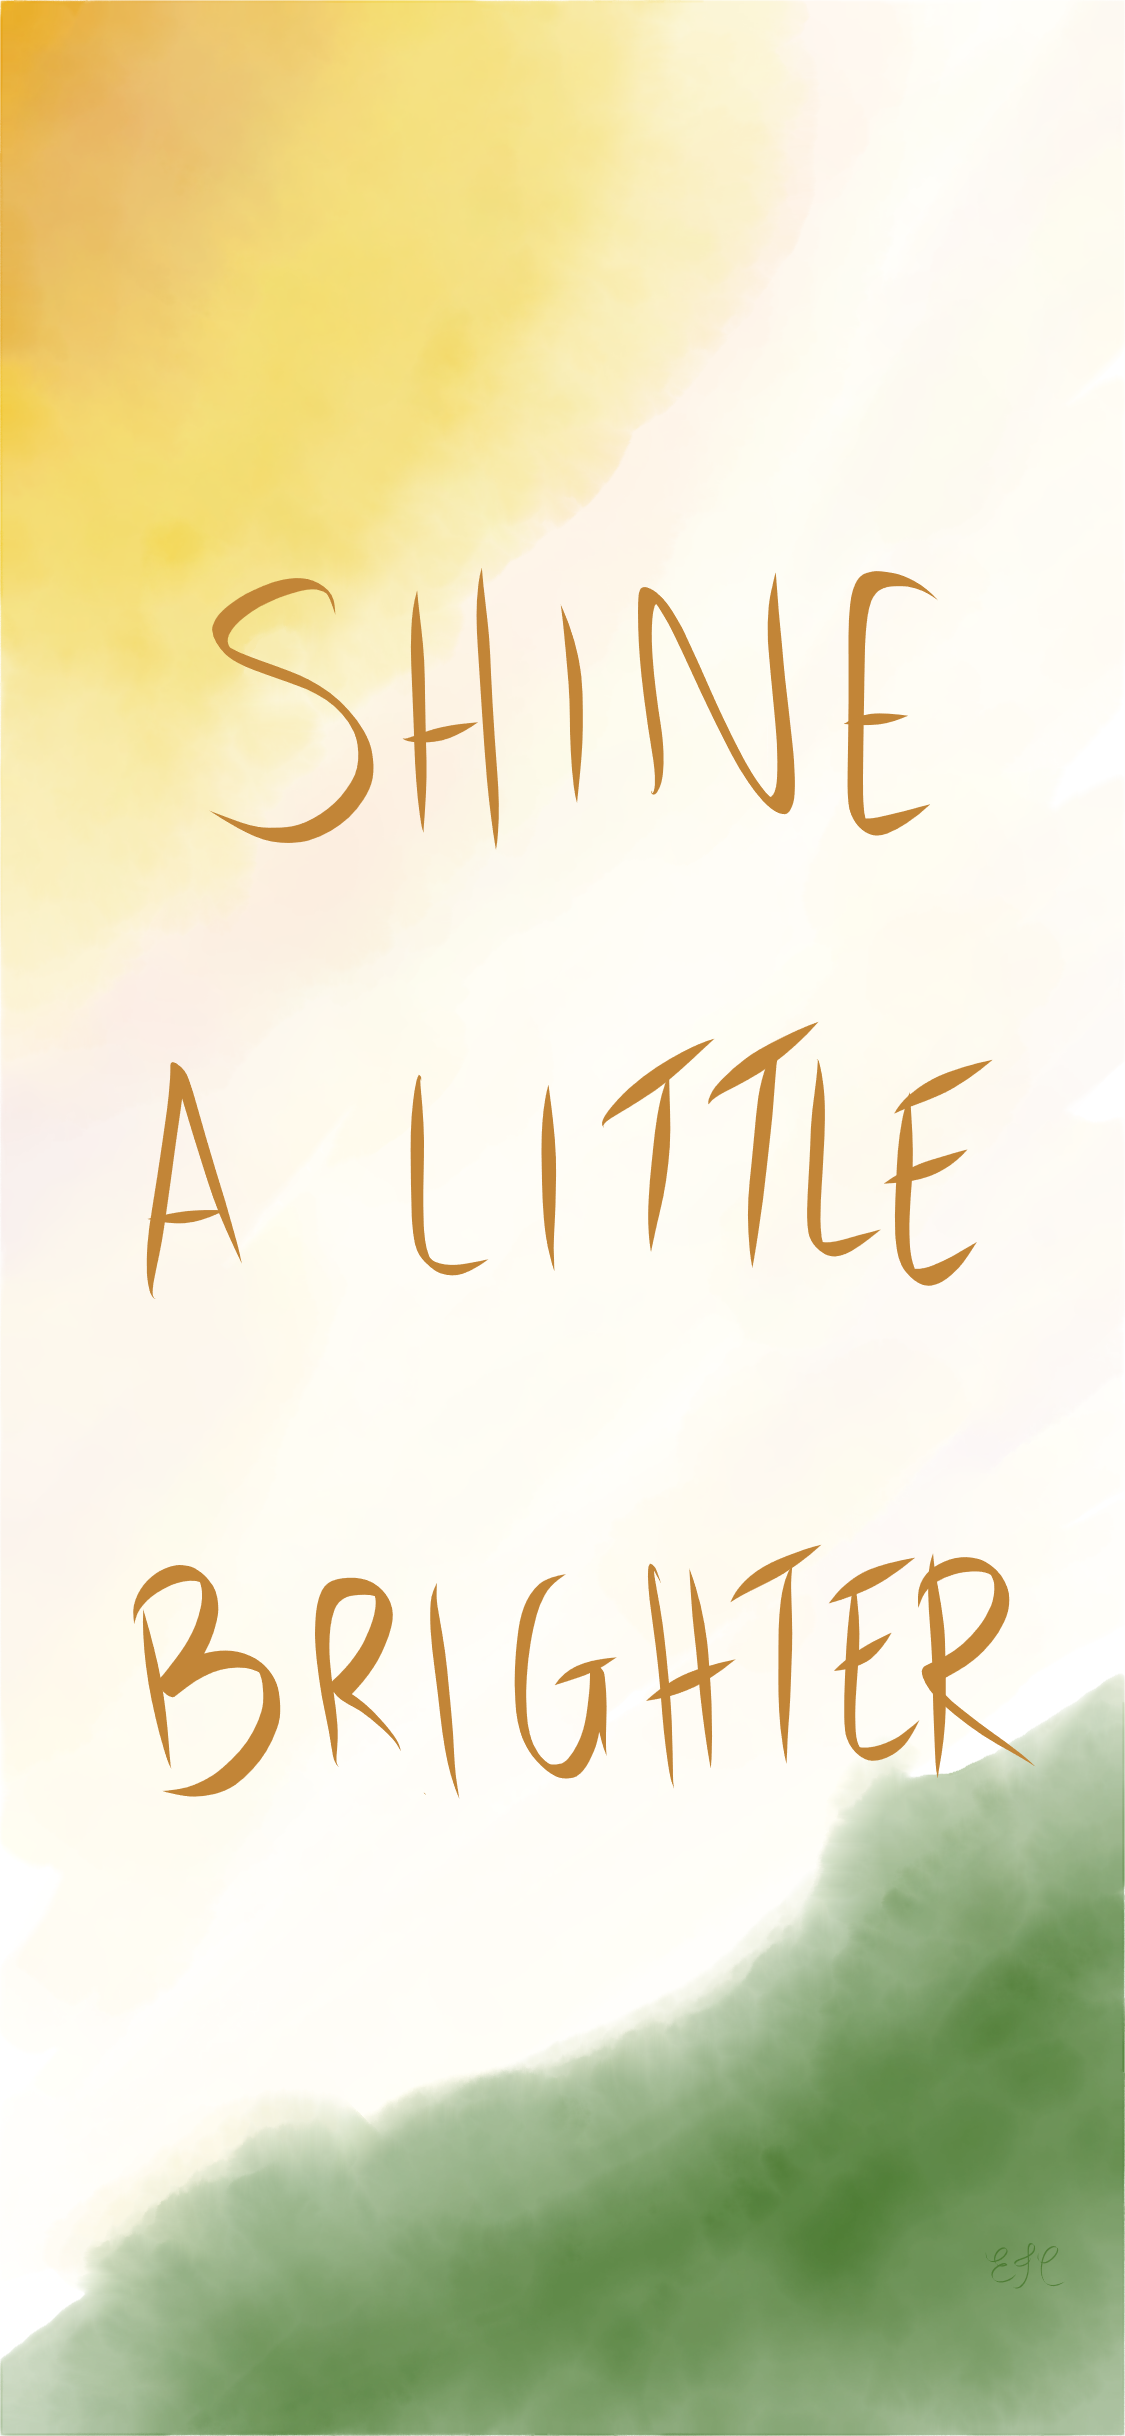 shine a little brighter watercolour free phone background